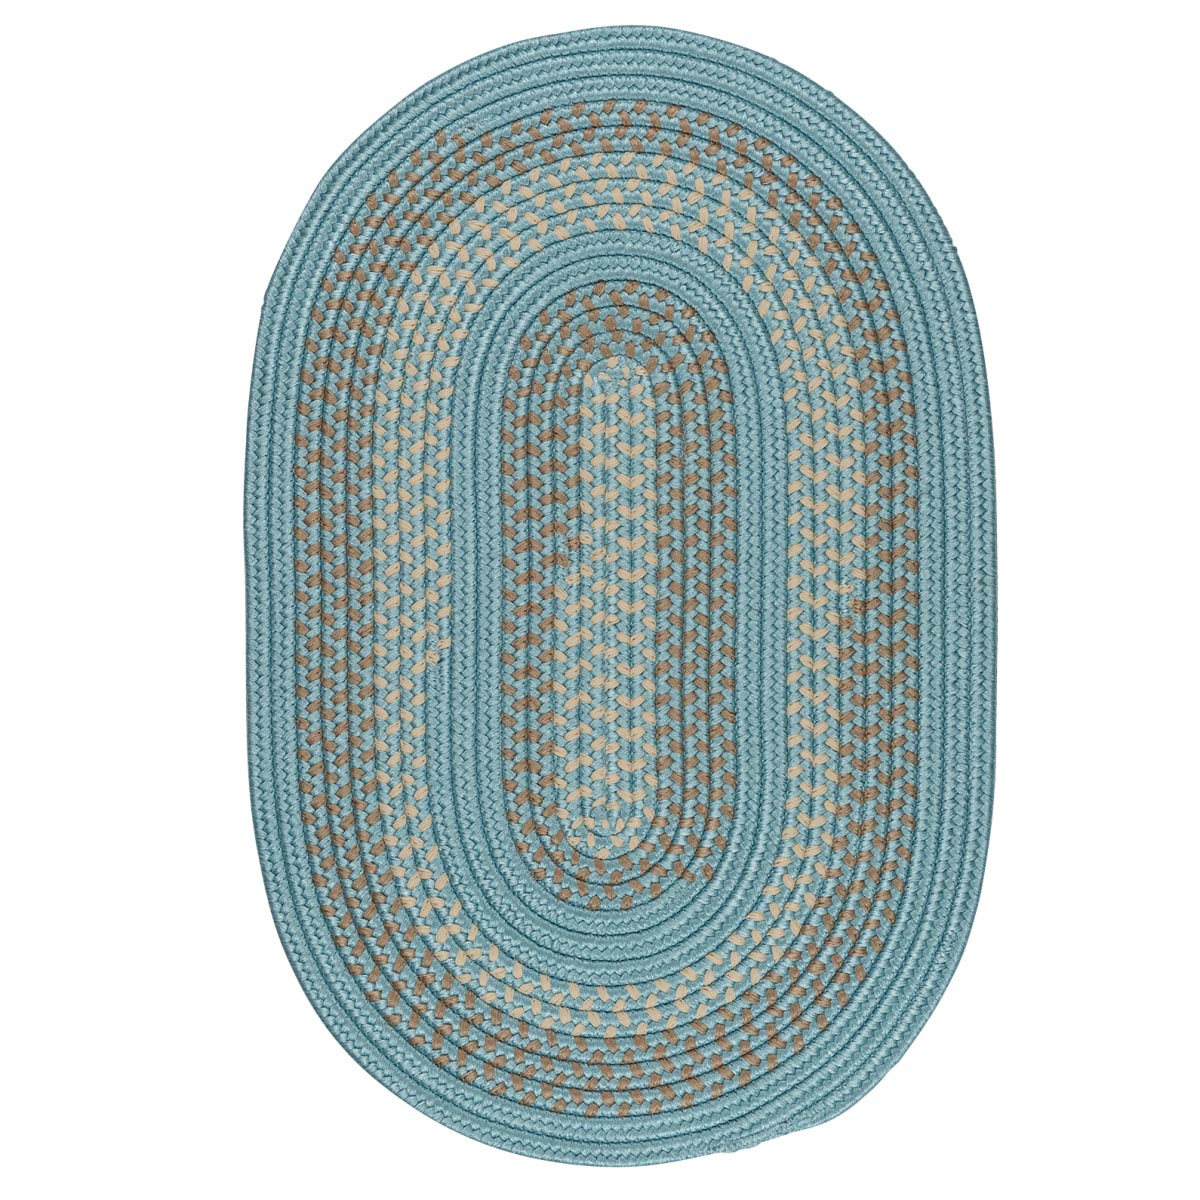 Georgetown Federal Blue Outdoor Braided Oval Rugs